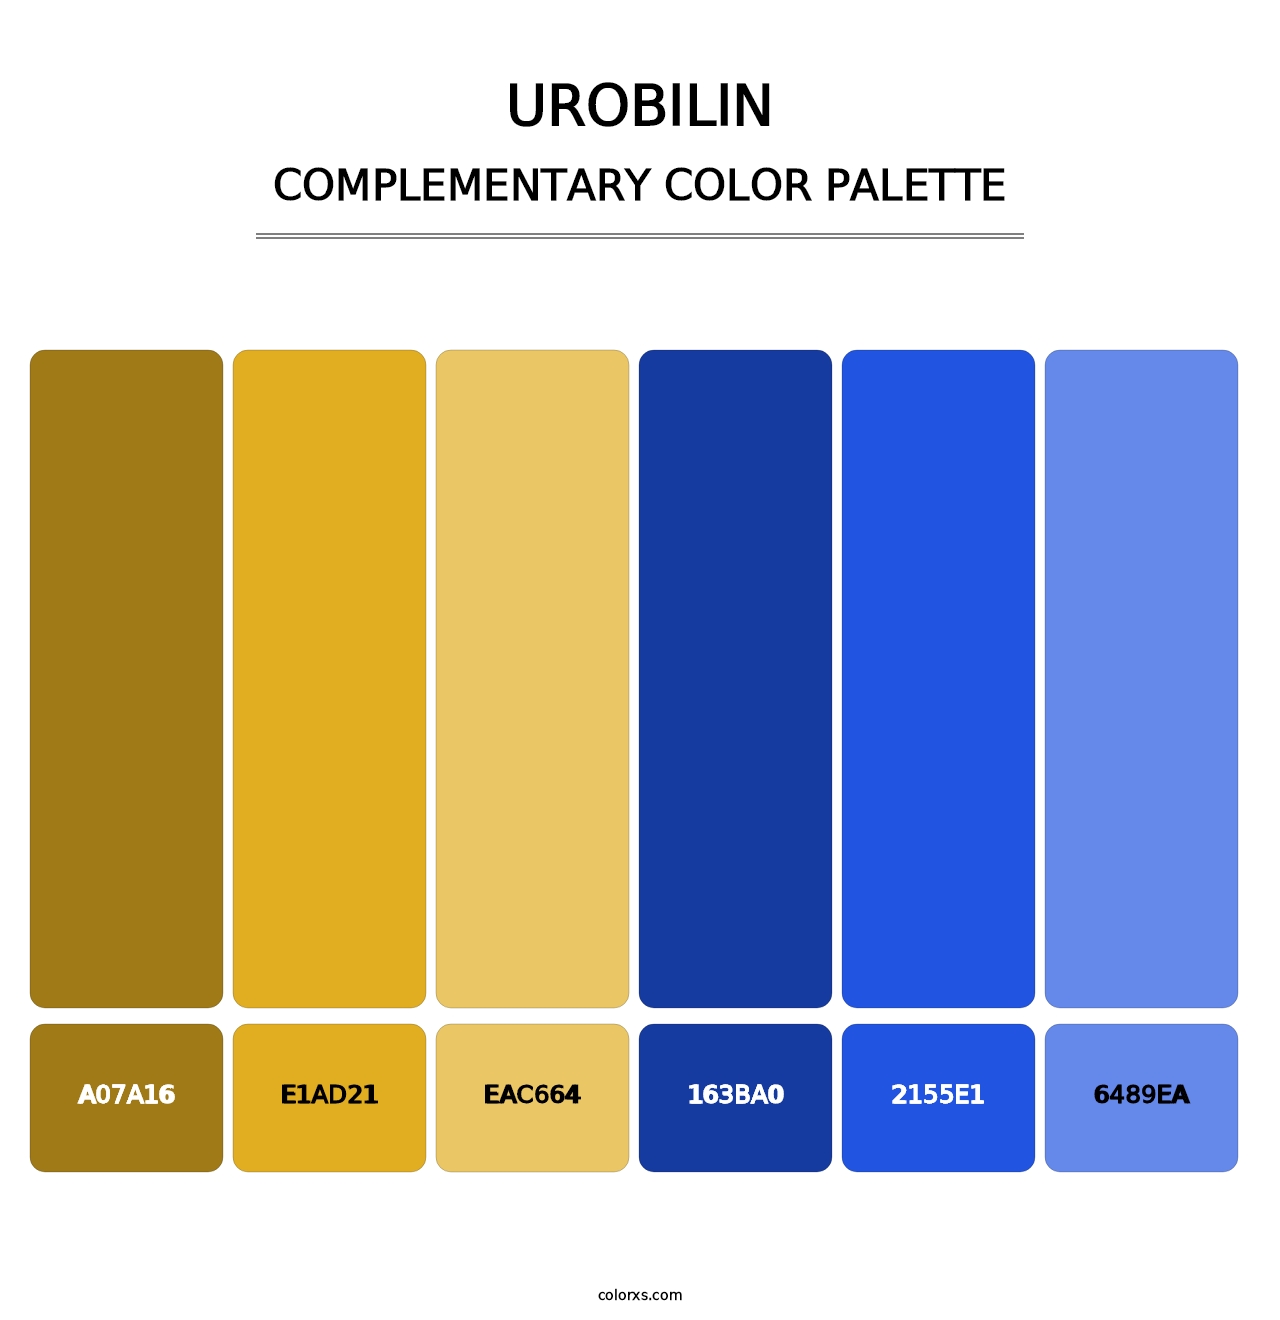 Urobilin - Complementary Color Palette